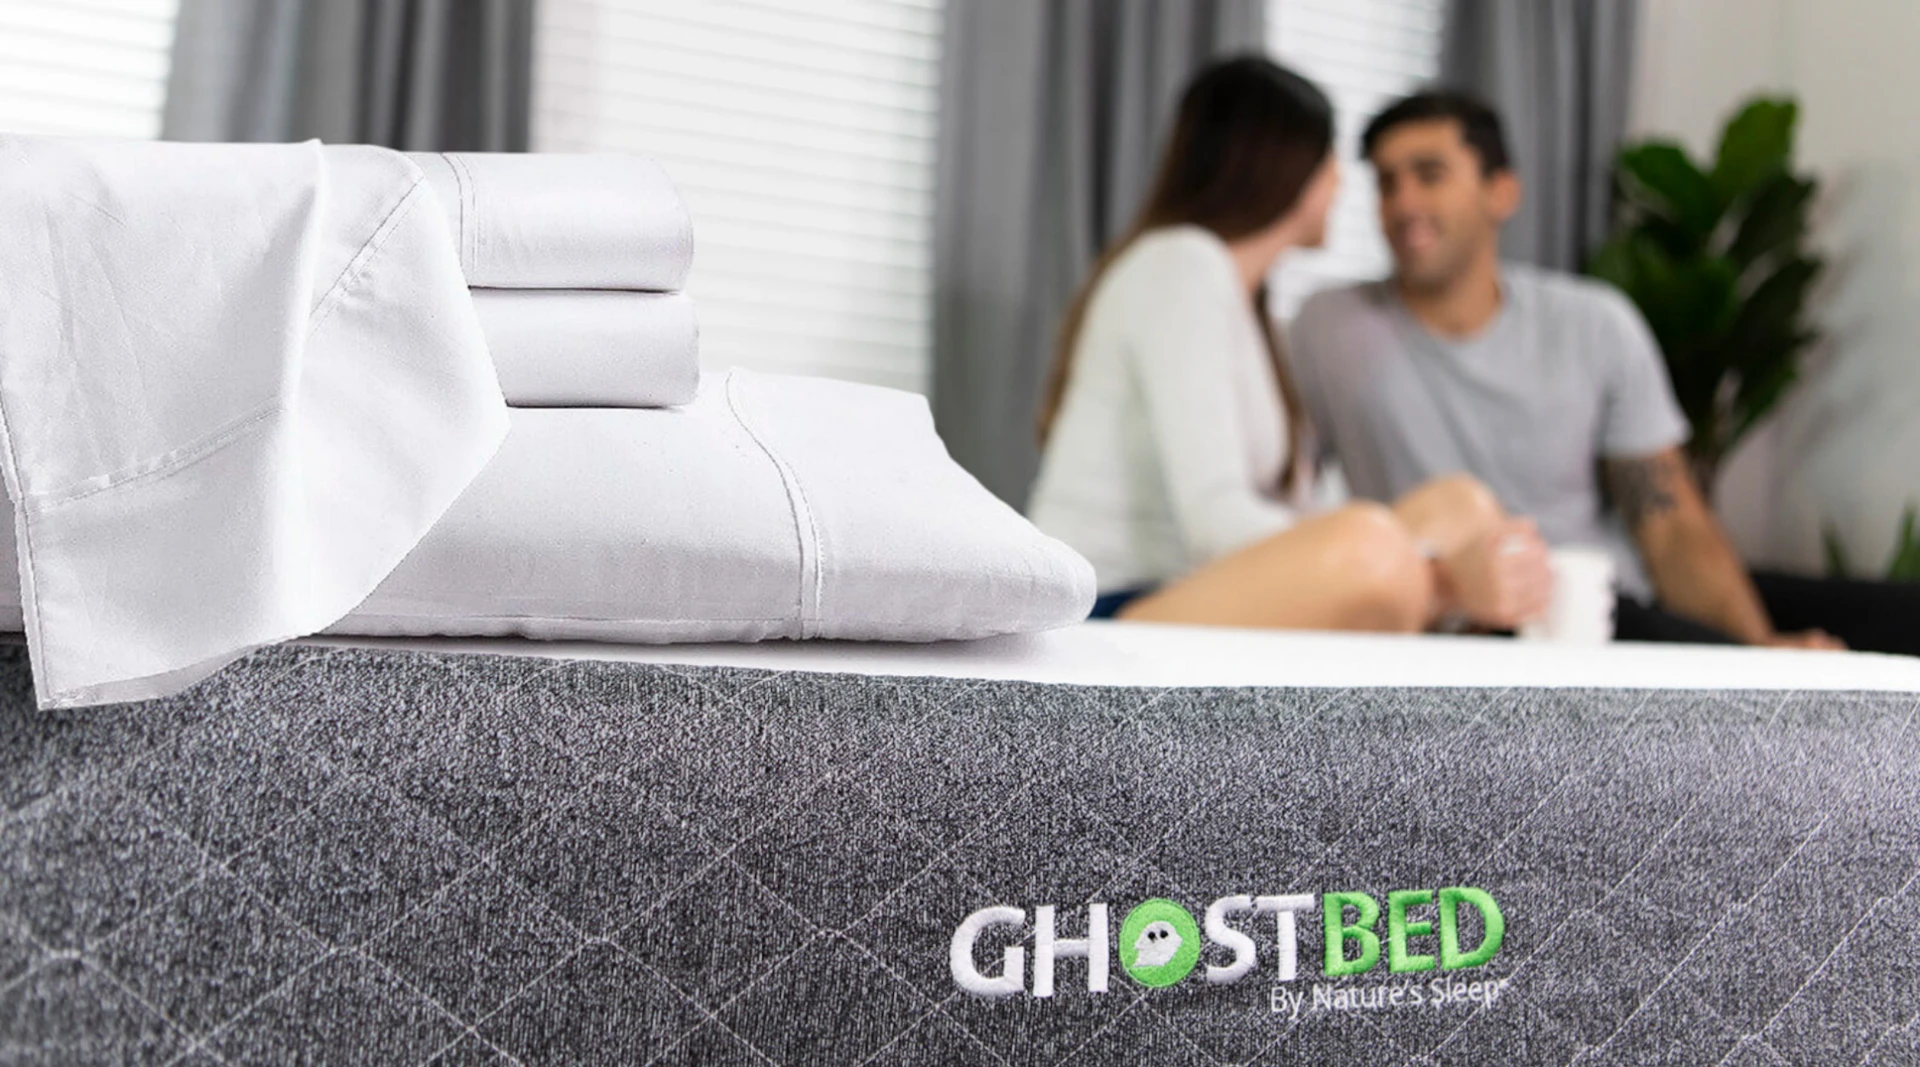 Do You Need a Special Mattress for an Adjustable Bed?